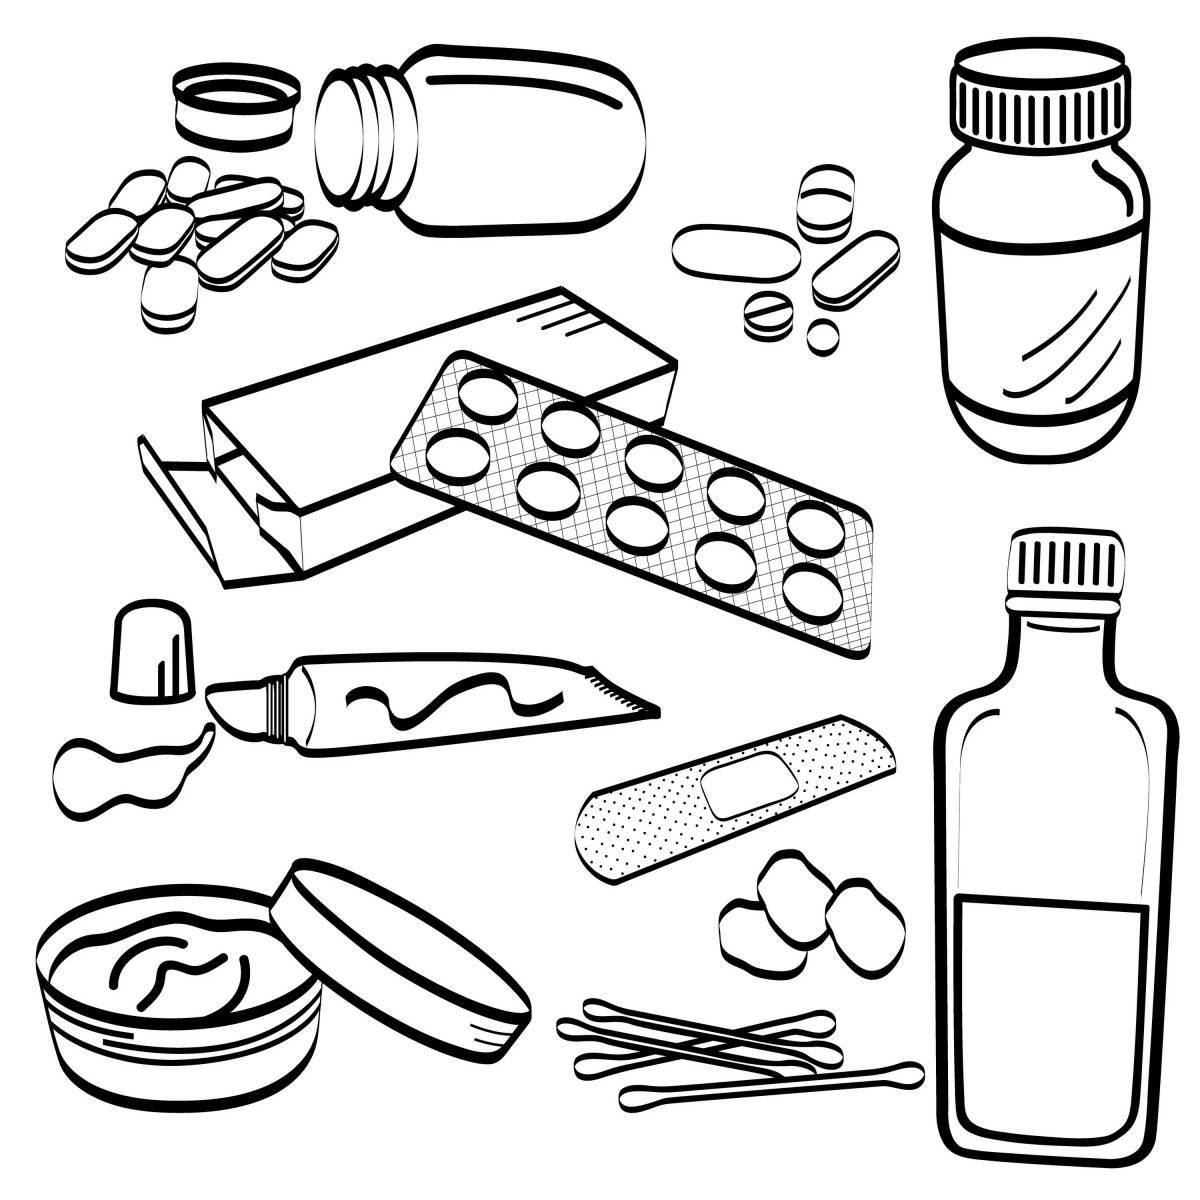 Innovative drugs coloring page